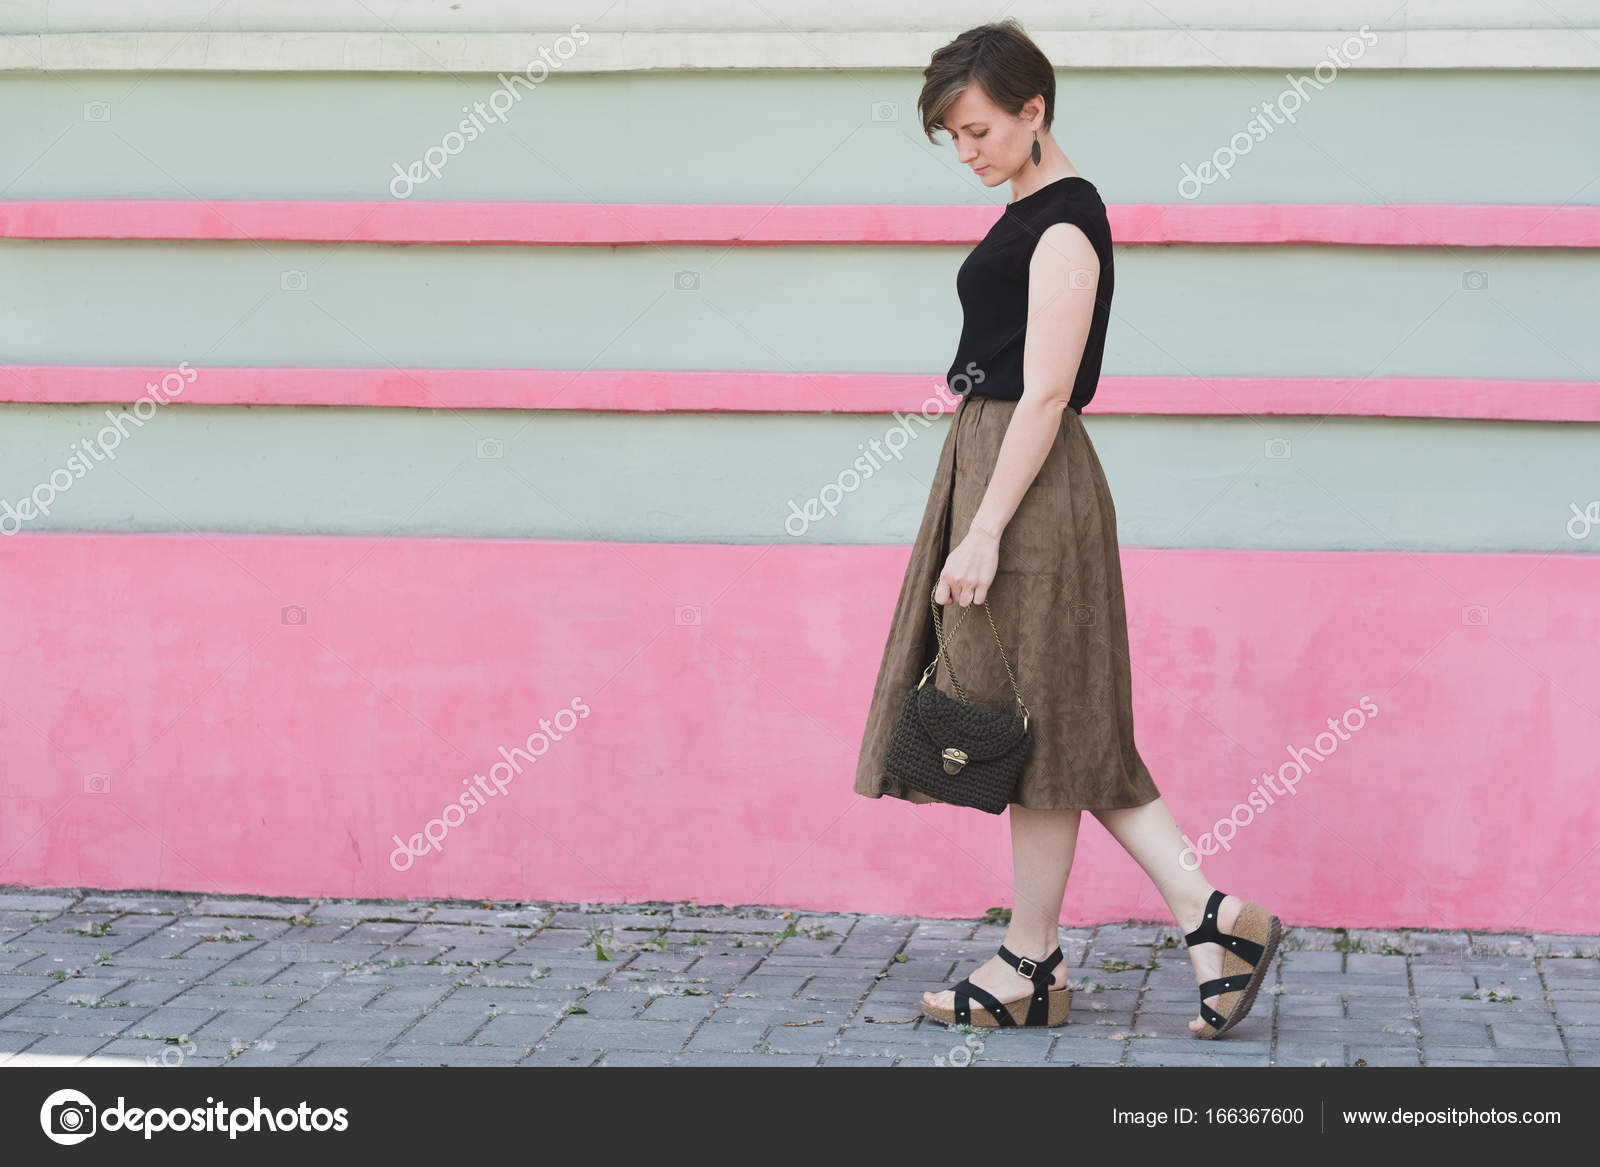 Outdoor fullbody portrait of young beautiful fashionable woman